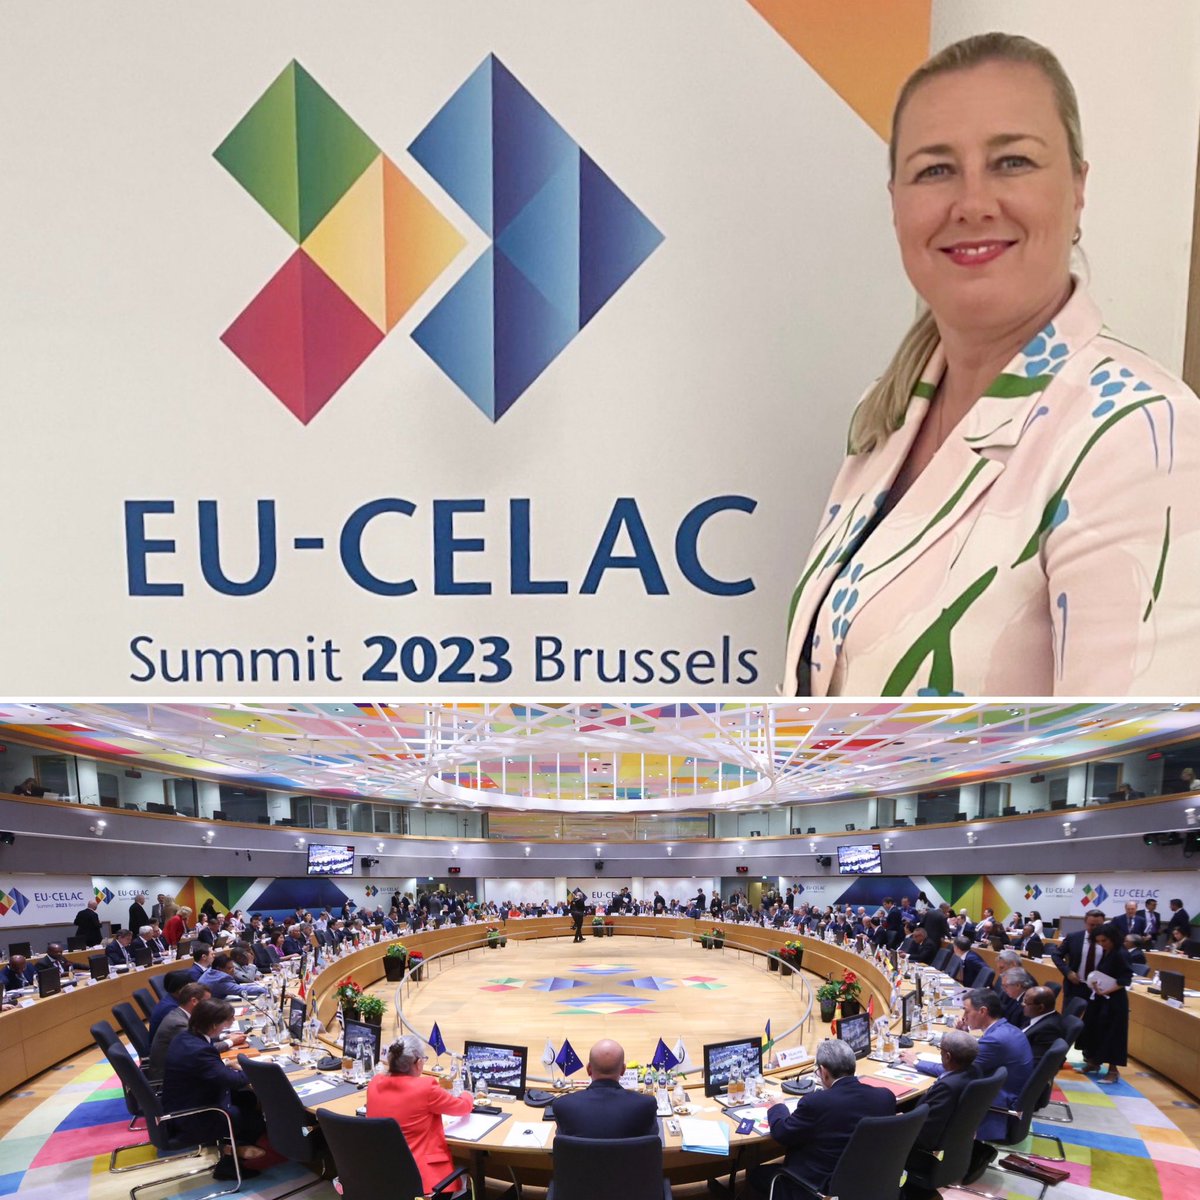 1️⃣ day of the Summit between 🇪🇺 and the Community of Latin American and Caribbean States #EULAC is over. 

Rich encounters, frank conversations and mutual eagerness to do more together allow this partnership to grow. 

I’m especially happy about the enthusiasm for #GlobalGateway!